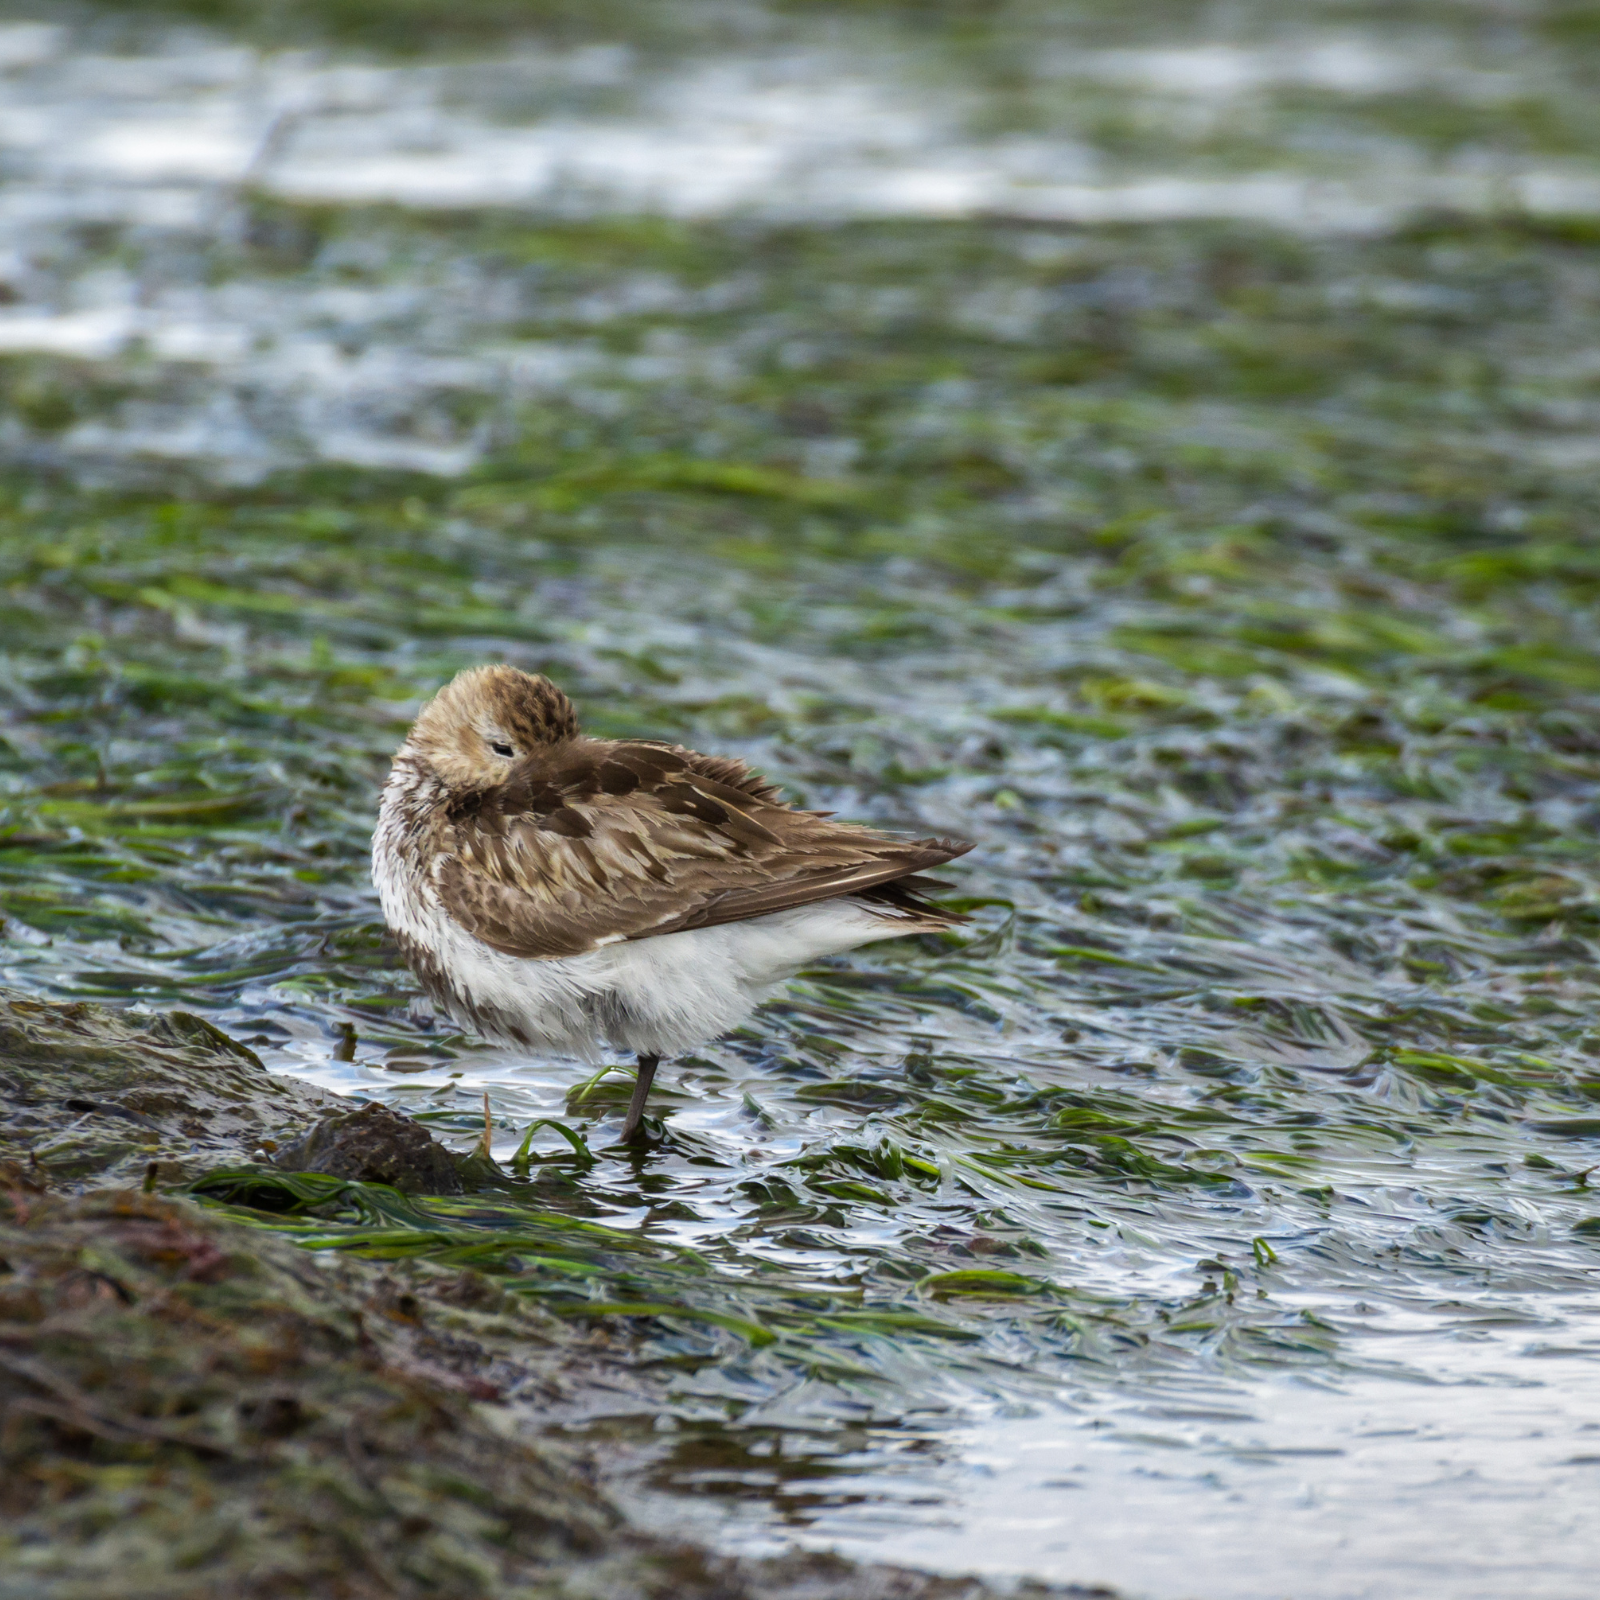 A Dunlin (Calidris alpina) stands with its head tucked into its wing